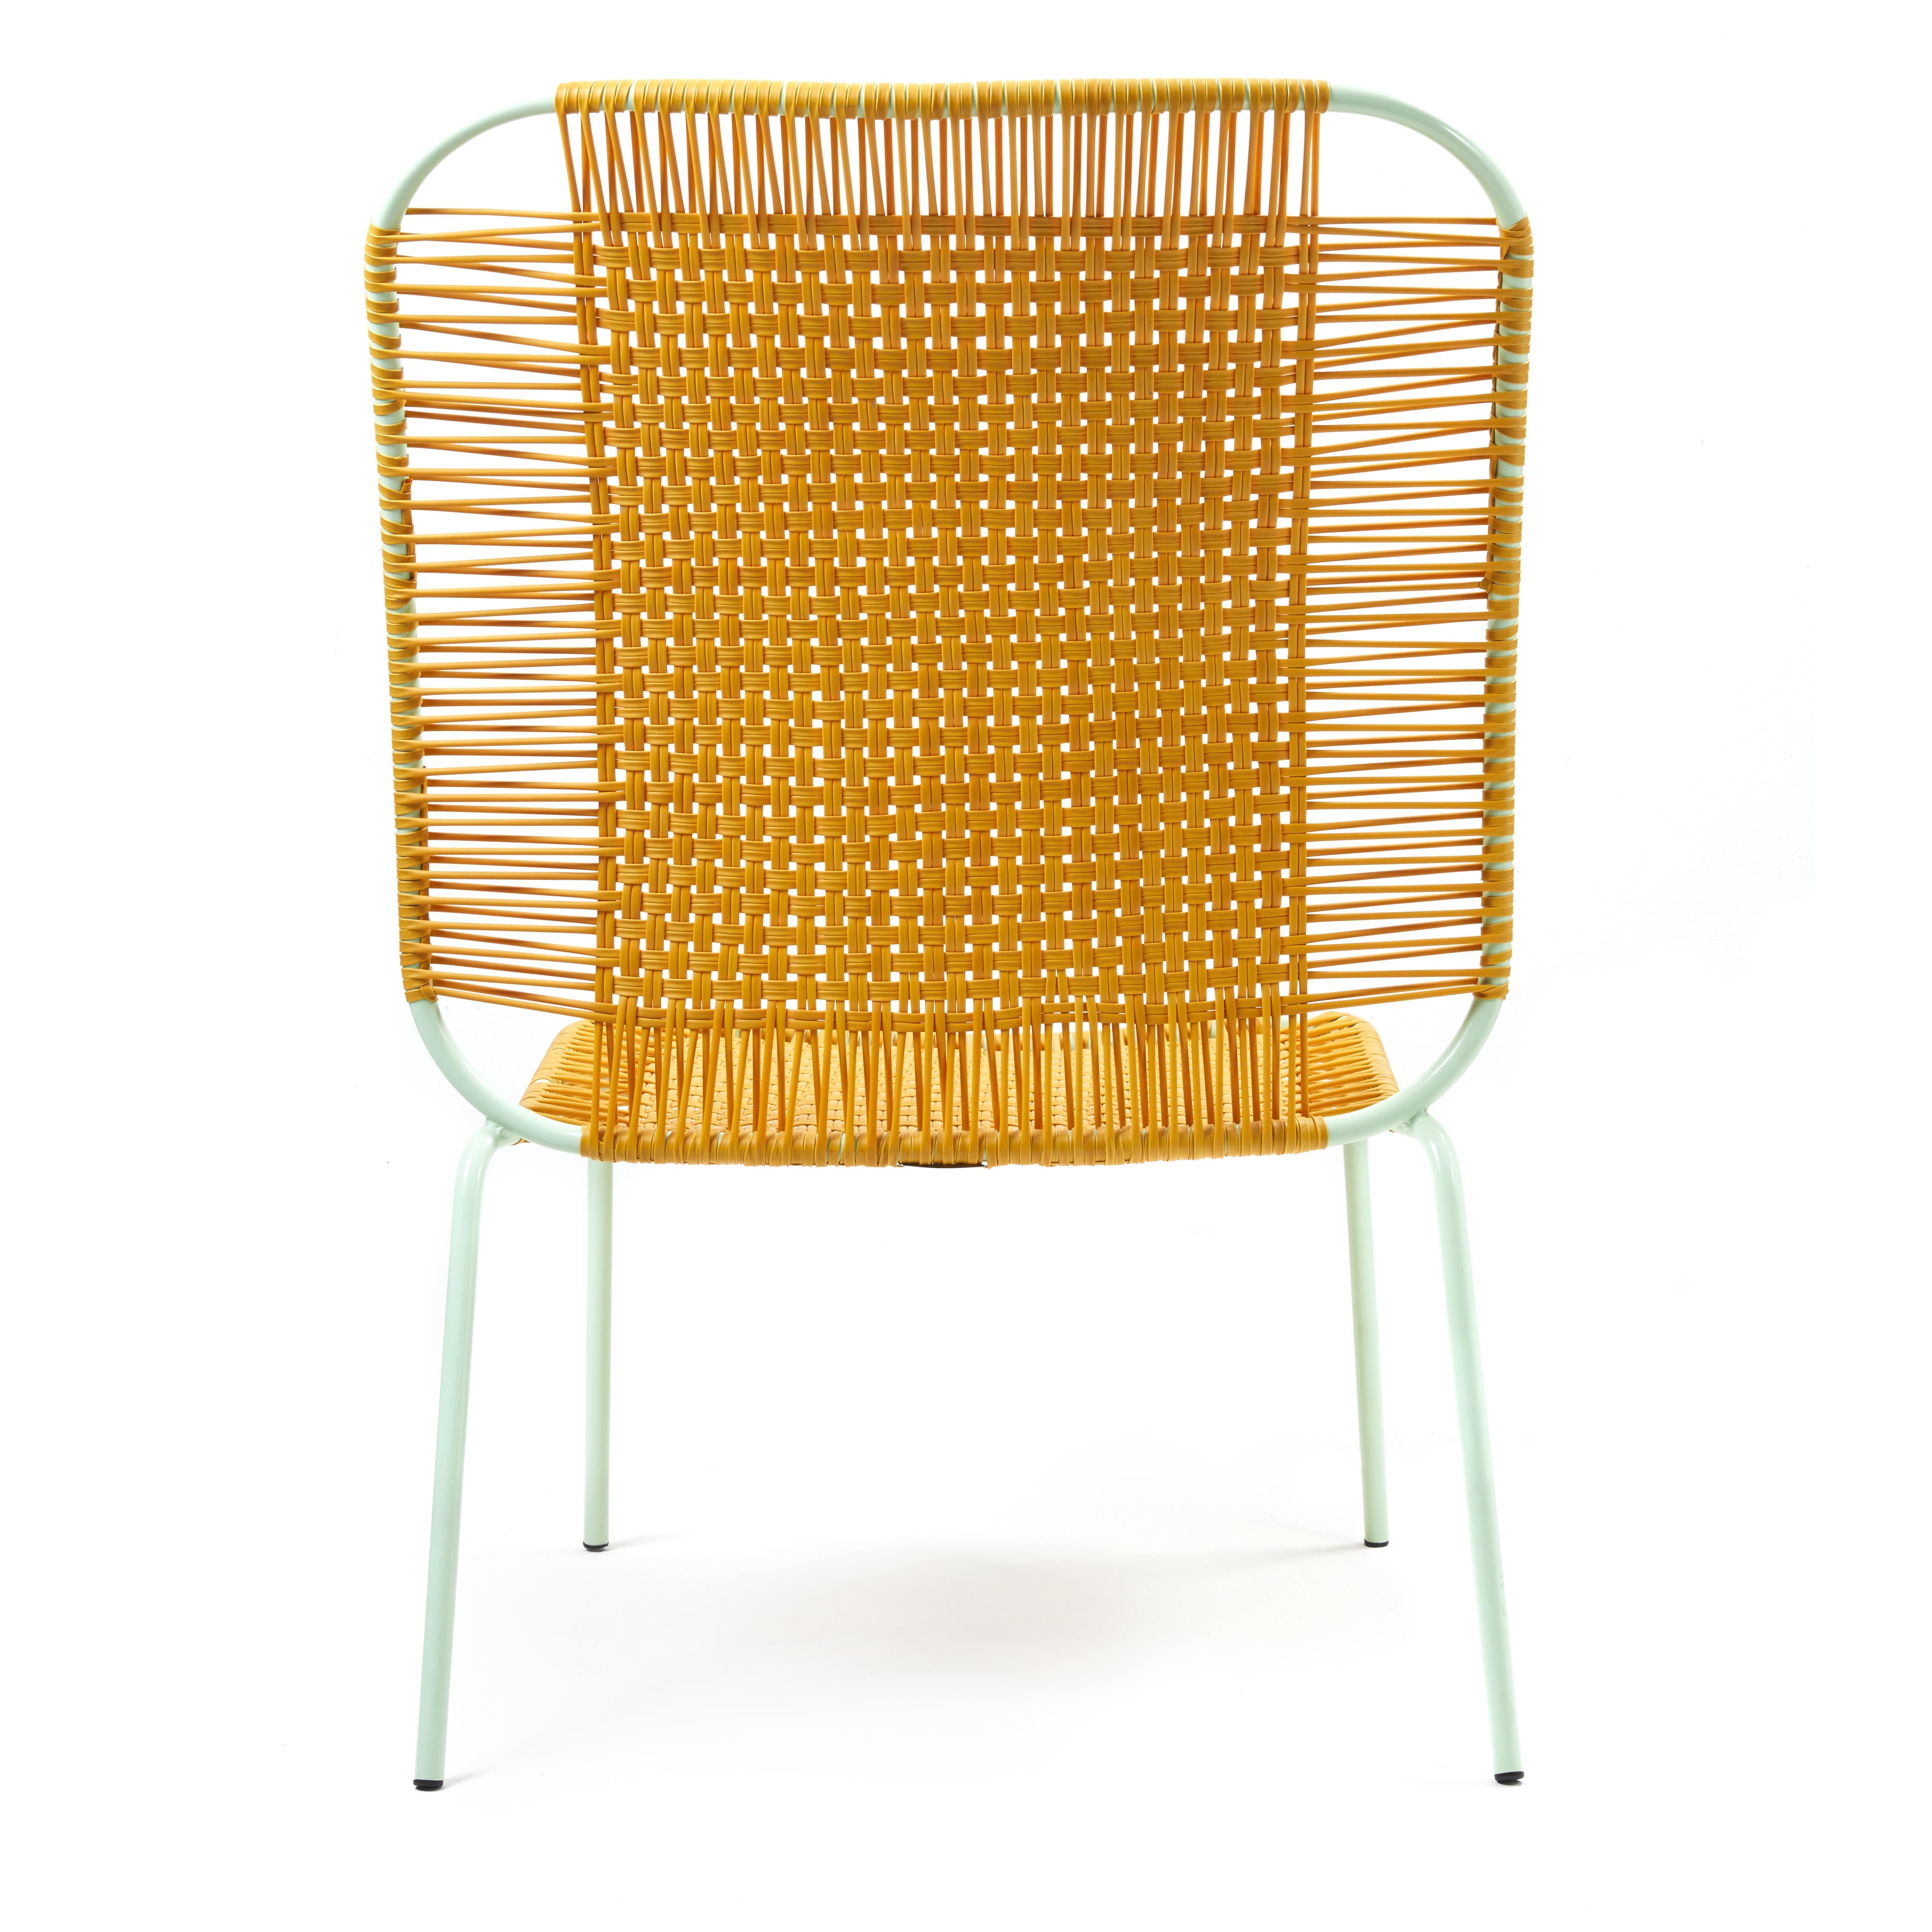 Honey Cielo lounge high chair by Sebastian Herkner
Materials: Galvanized and powder-coated tubular steel. PVC strings are made from recycled plastic.
Technique: Made from recycled plastic and weaved by local craftspeople in Cartagena, Colombia.